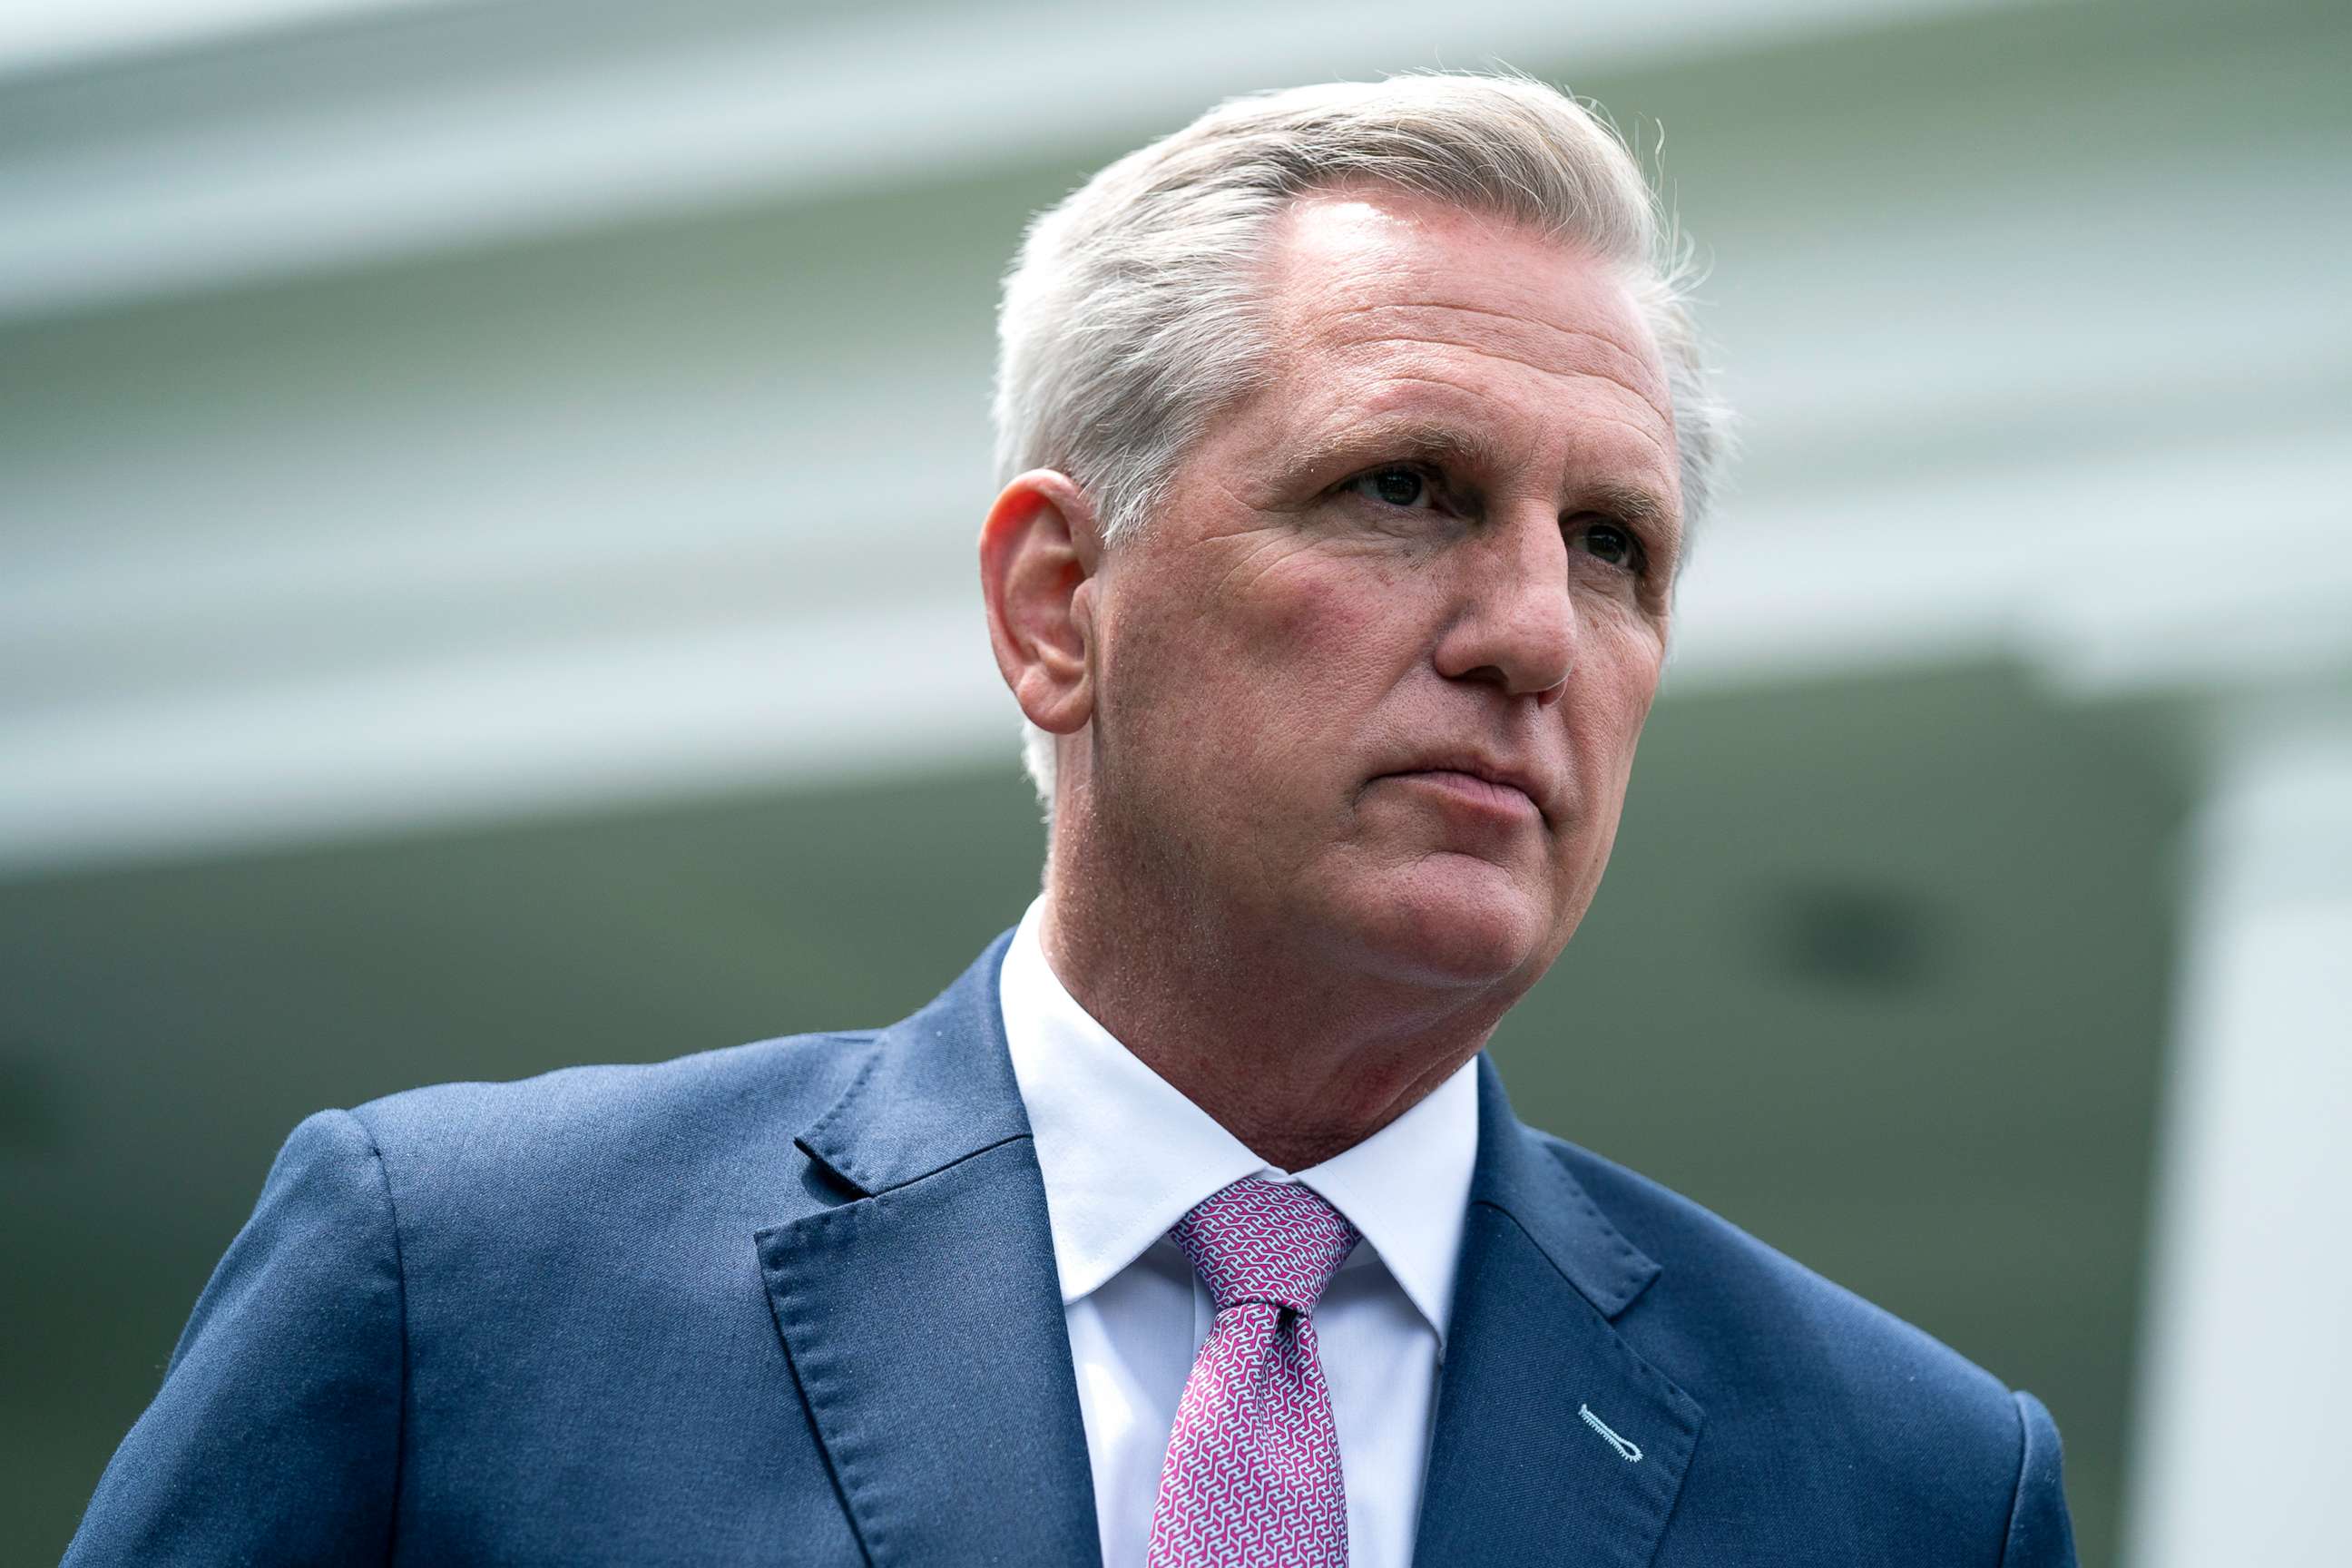 PHOTO: House Minority Leader Kevin McCarthy speaks to reporters outside the White House after a meeting with President Joe Biden, May 12, 2021.